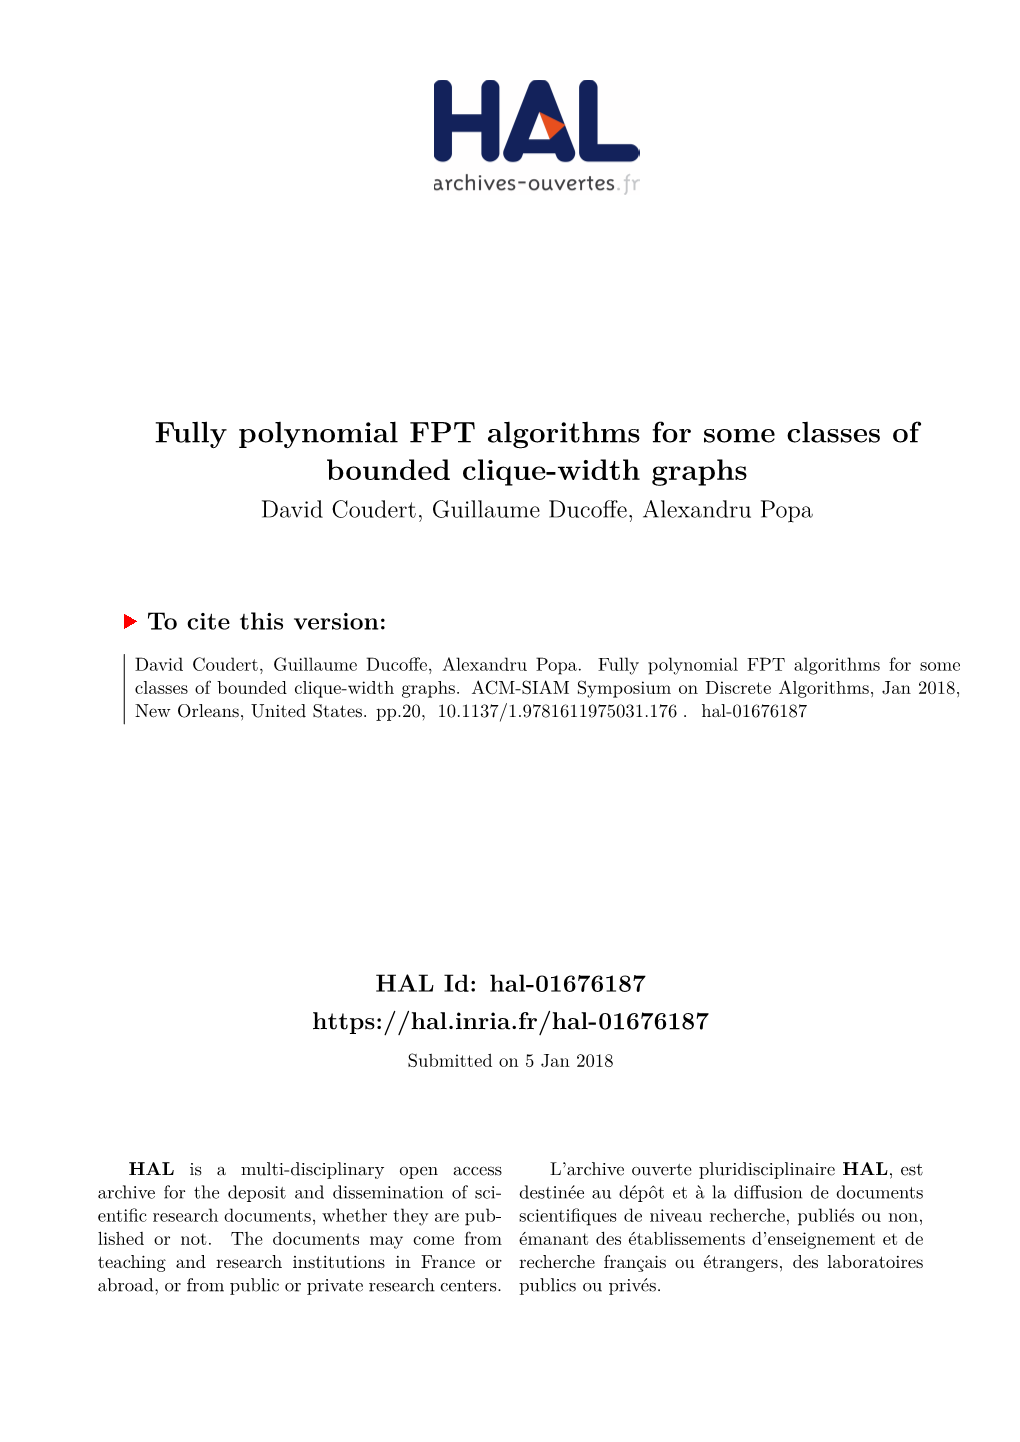 Fully Polynomial FPT Algorithms for Some Classes of Bounded Clique-Width Graphs David Coudert, Guillaume Ducoffe, Alexandru Popa